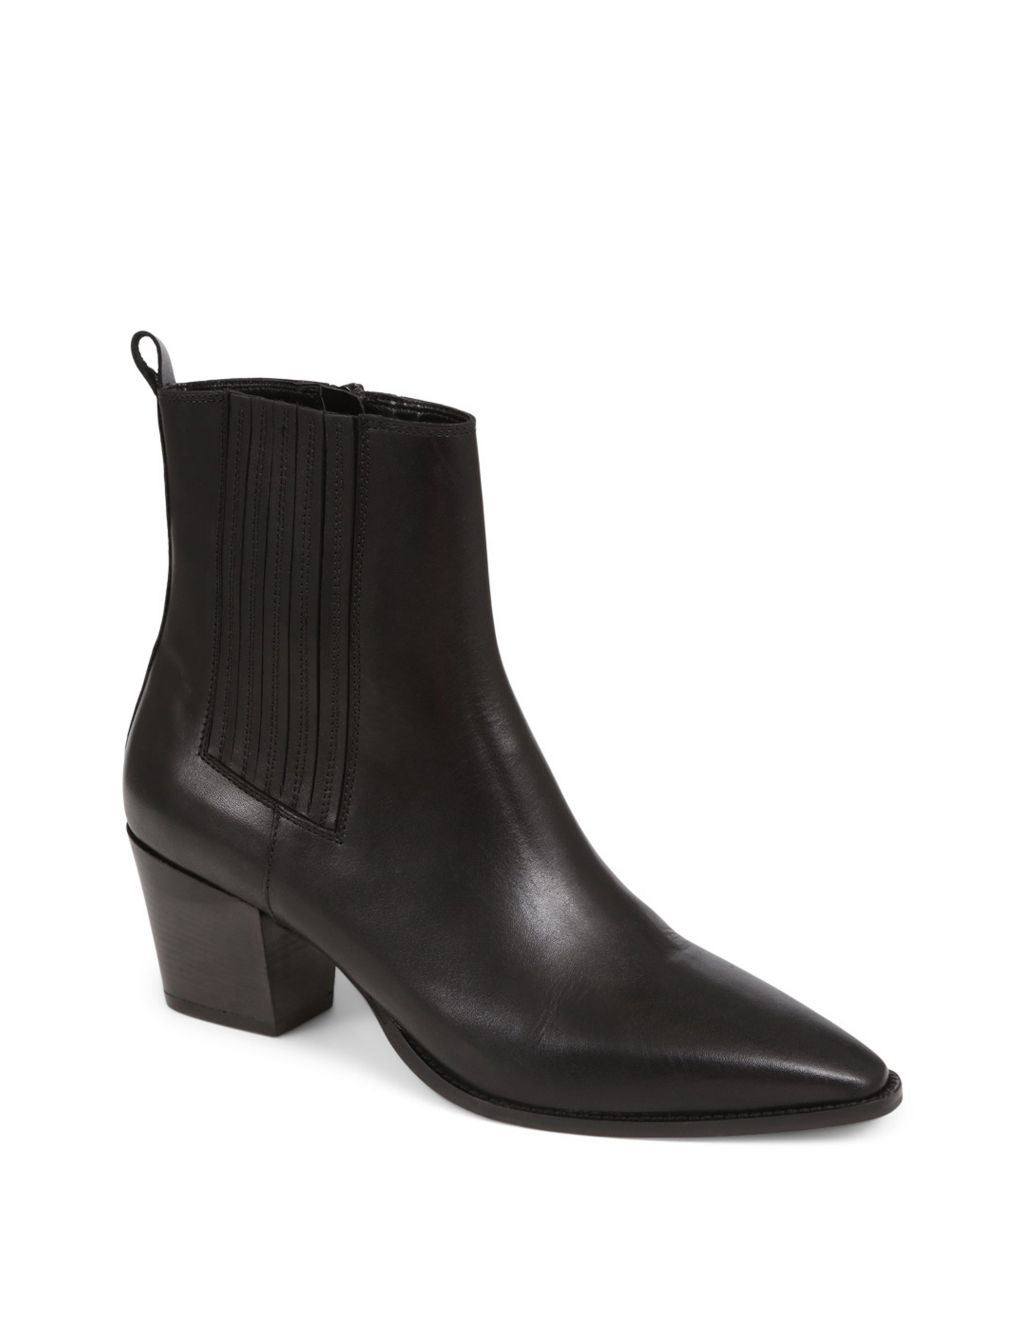 Leather Block Heel Pointed Ankle Boots image 3